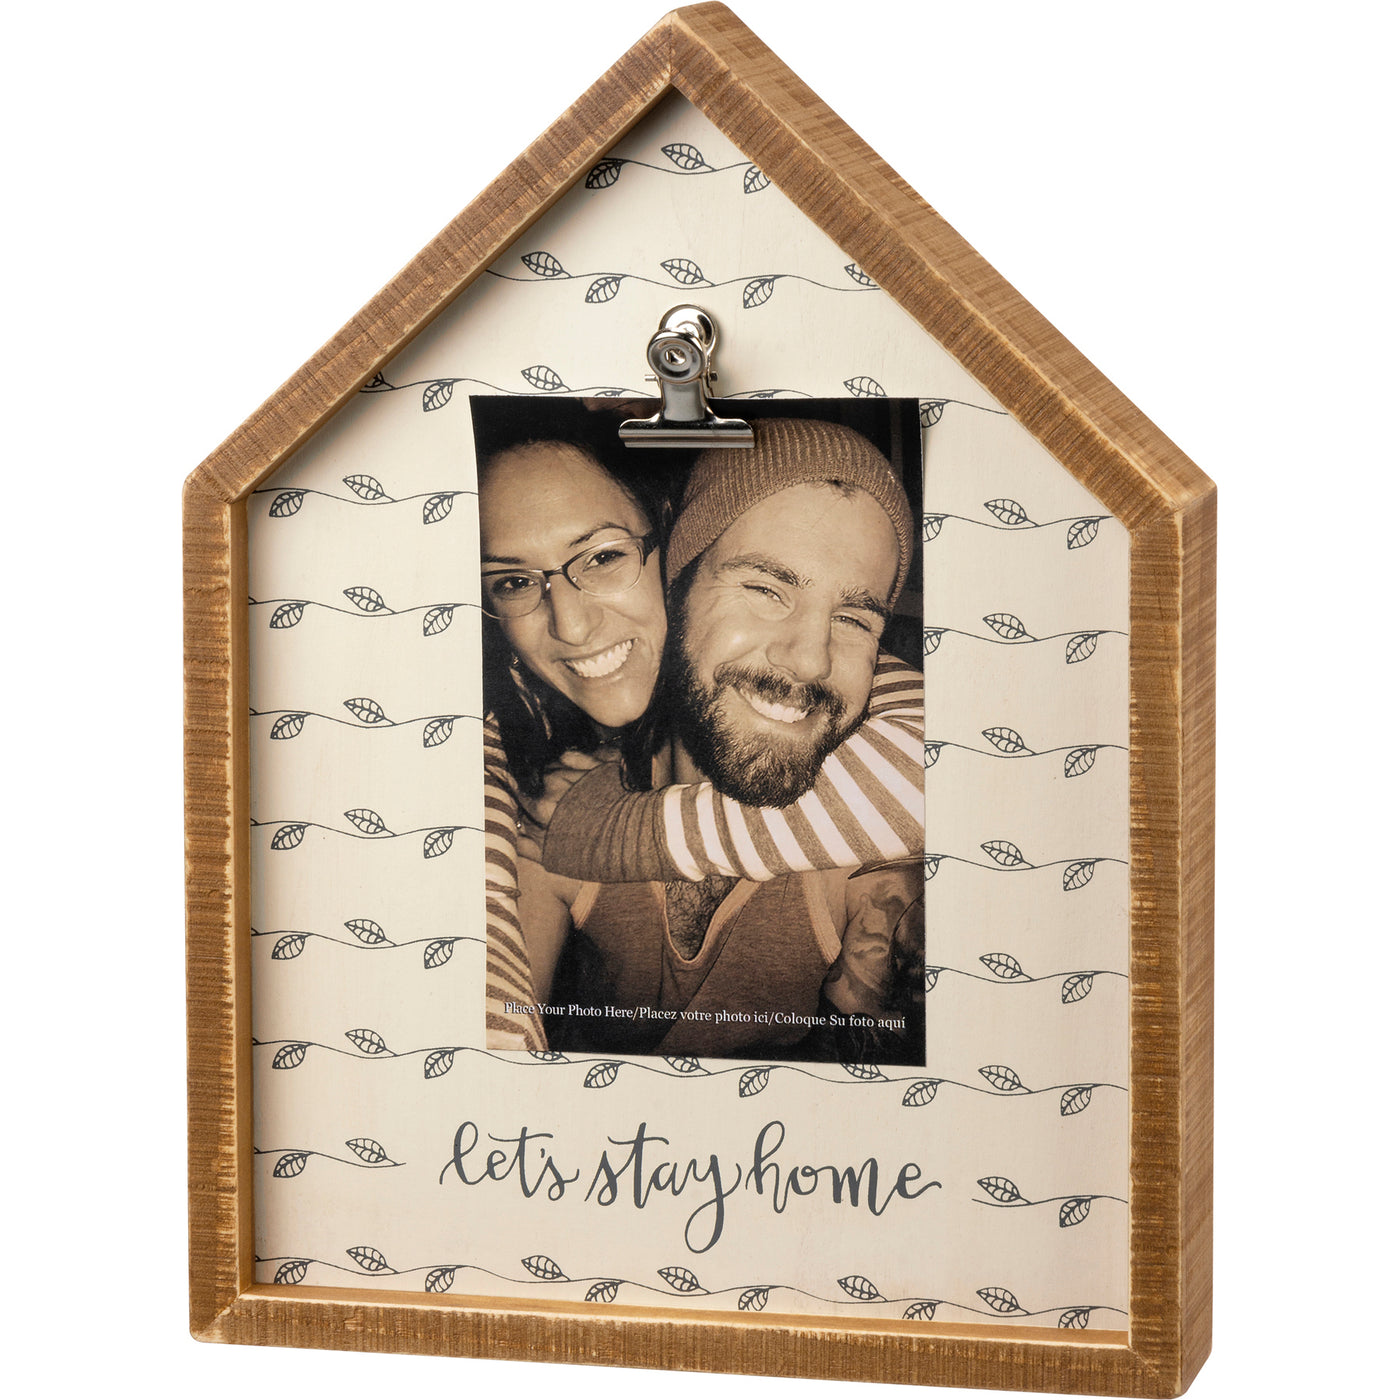 Stay Home Inset Box Frame